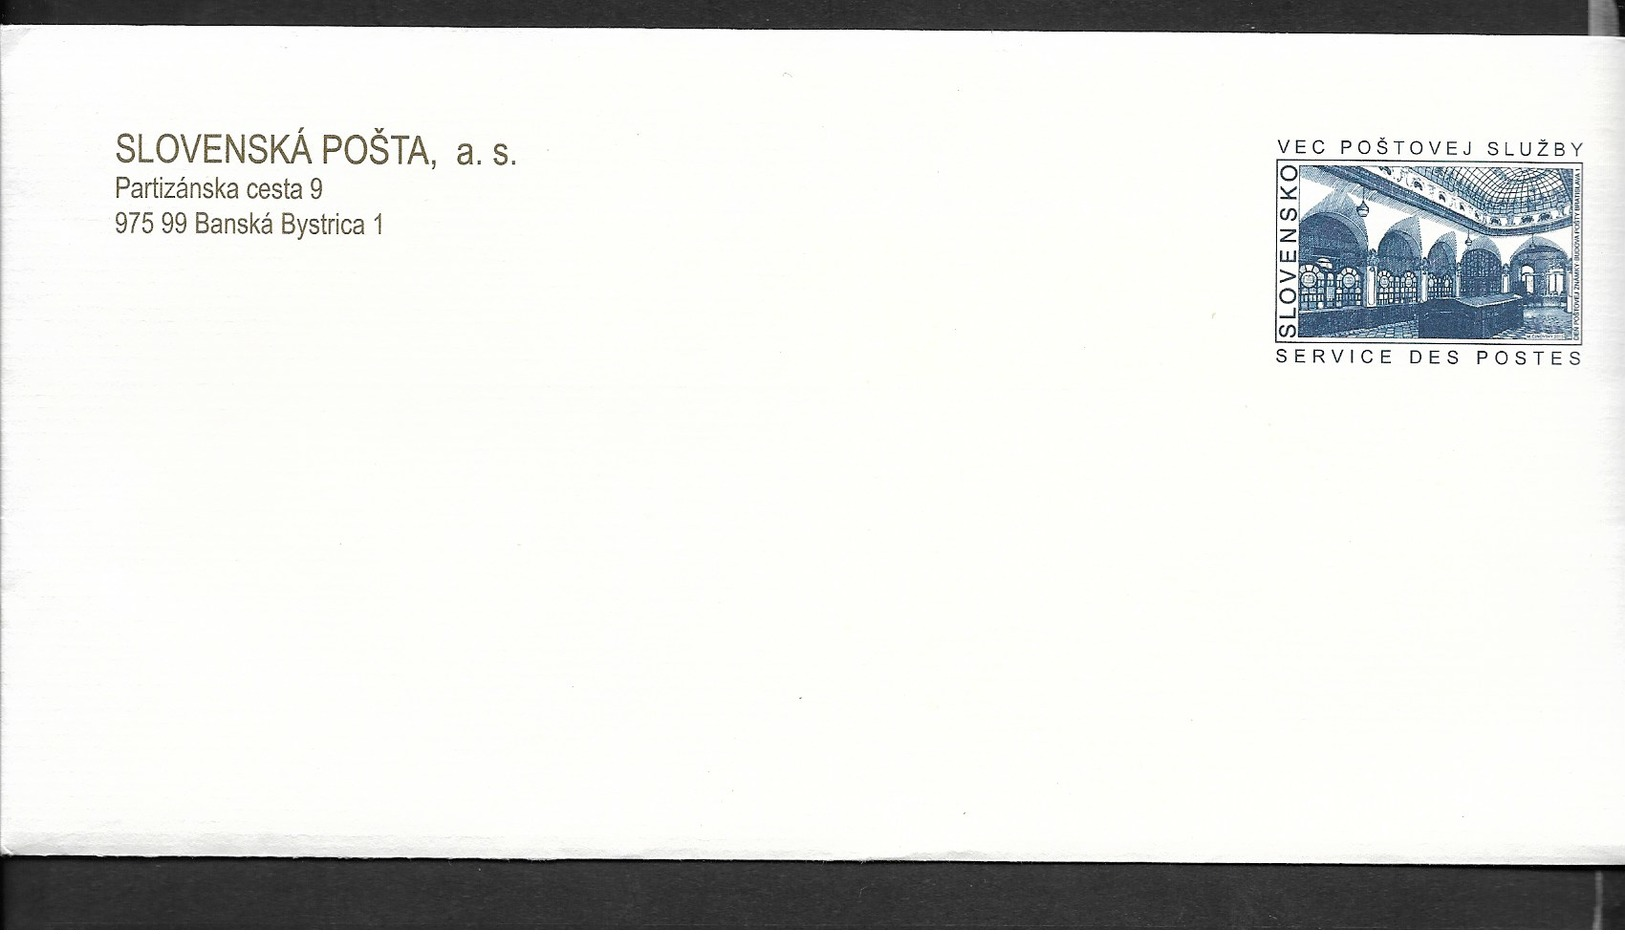 E768-SLOVAKIA 2016 -POSTAL STATIONERY-MINISTRY OF TRANSPORT POST AND TELECOMUNICATIONS OF THE SLOVAK REPUBLIC - Briefe